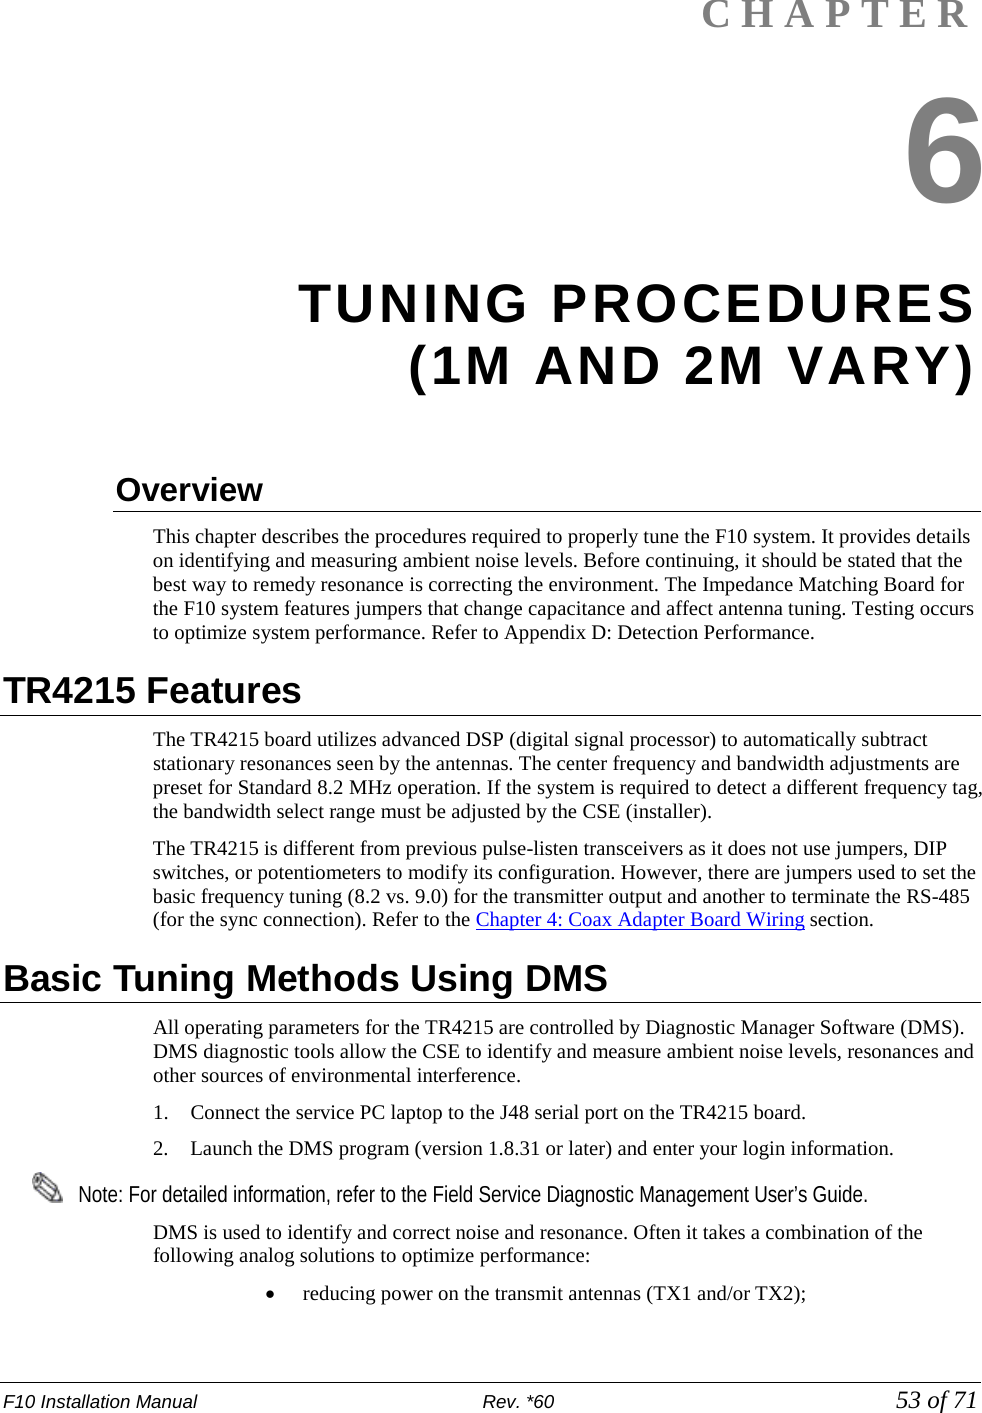 F10 Installation Manual                          Rev. *60            53 of 71 CHAPTER 6 TUNING PROCEDURES  (1M AND 2M VARY)  Overview This chapter describes the procedures required to properly tune the F10 system. It provides details on identifying and measuring ambient noise levels. Before continuing, it should be stated that the best way to remedy resonance is correcting the environment. The Impedance Matching Board for the F10 system features jumpers that change capacitance and affect antenna tuning. Testing occurs to optimize system performance. Refer to Appendix D: Detection Performance.  TR4215 Features The TR4215 board utilizes advanced DSP (digital signal processor) to automatically subtract stationary resonances seen by the antennas. The center frequency and bandwidth adjustments are preset for Standard 8.2 MHz operation. If the system is required to detect a different frequency tag, the bandwidth select range must be adjusted by the CSE (installer).  The TR4215 is different from previous pulse-listen transceivers as it does not use jumpers, DIP switches, or potentiometers to modify its configuration. However, there are jumpers used to set the basic frequency tuning (8.2 vs. 9.0) for the transmitter output and another to terminate the RS-485 (for the sync connection). Refer to the Chapter 4: Coax Adapter Board Wiring section.  Basic Tuning Methods Using DMS  All operating parameters for the TR4215 are controlled by Diagnostic Manager Software (DMS).  DMS diagnostic tools allow the CSE to identify and measure ambient noise levels, resonances and other sources of environmental interference.  1. Connect the service PC laptop to the J48 serial port on the TR4215 board. 2. Launch the DMS program (version 1.8.31 or later) and enter your login information.     Note: For detailed information, refer to the Field Service Diagnostic Management User’s Guide. DMS is used to identify and correct noise and resonance. Often it takes a combination of the following analog solutions to optimize performance: • reducing power on the transmit antennas (TX1 and/or TX2);  